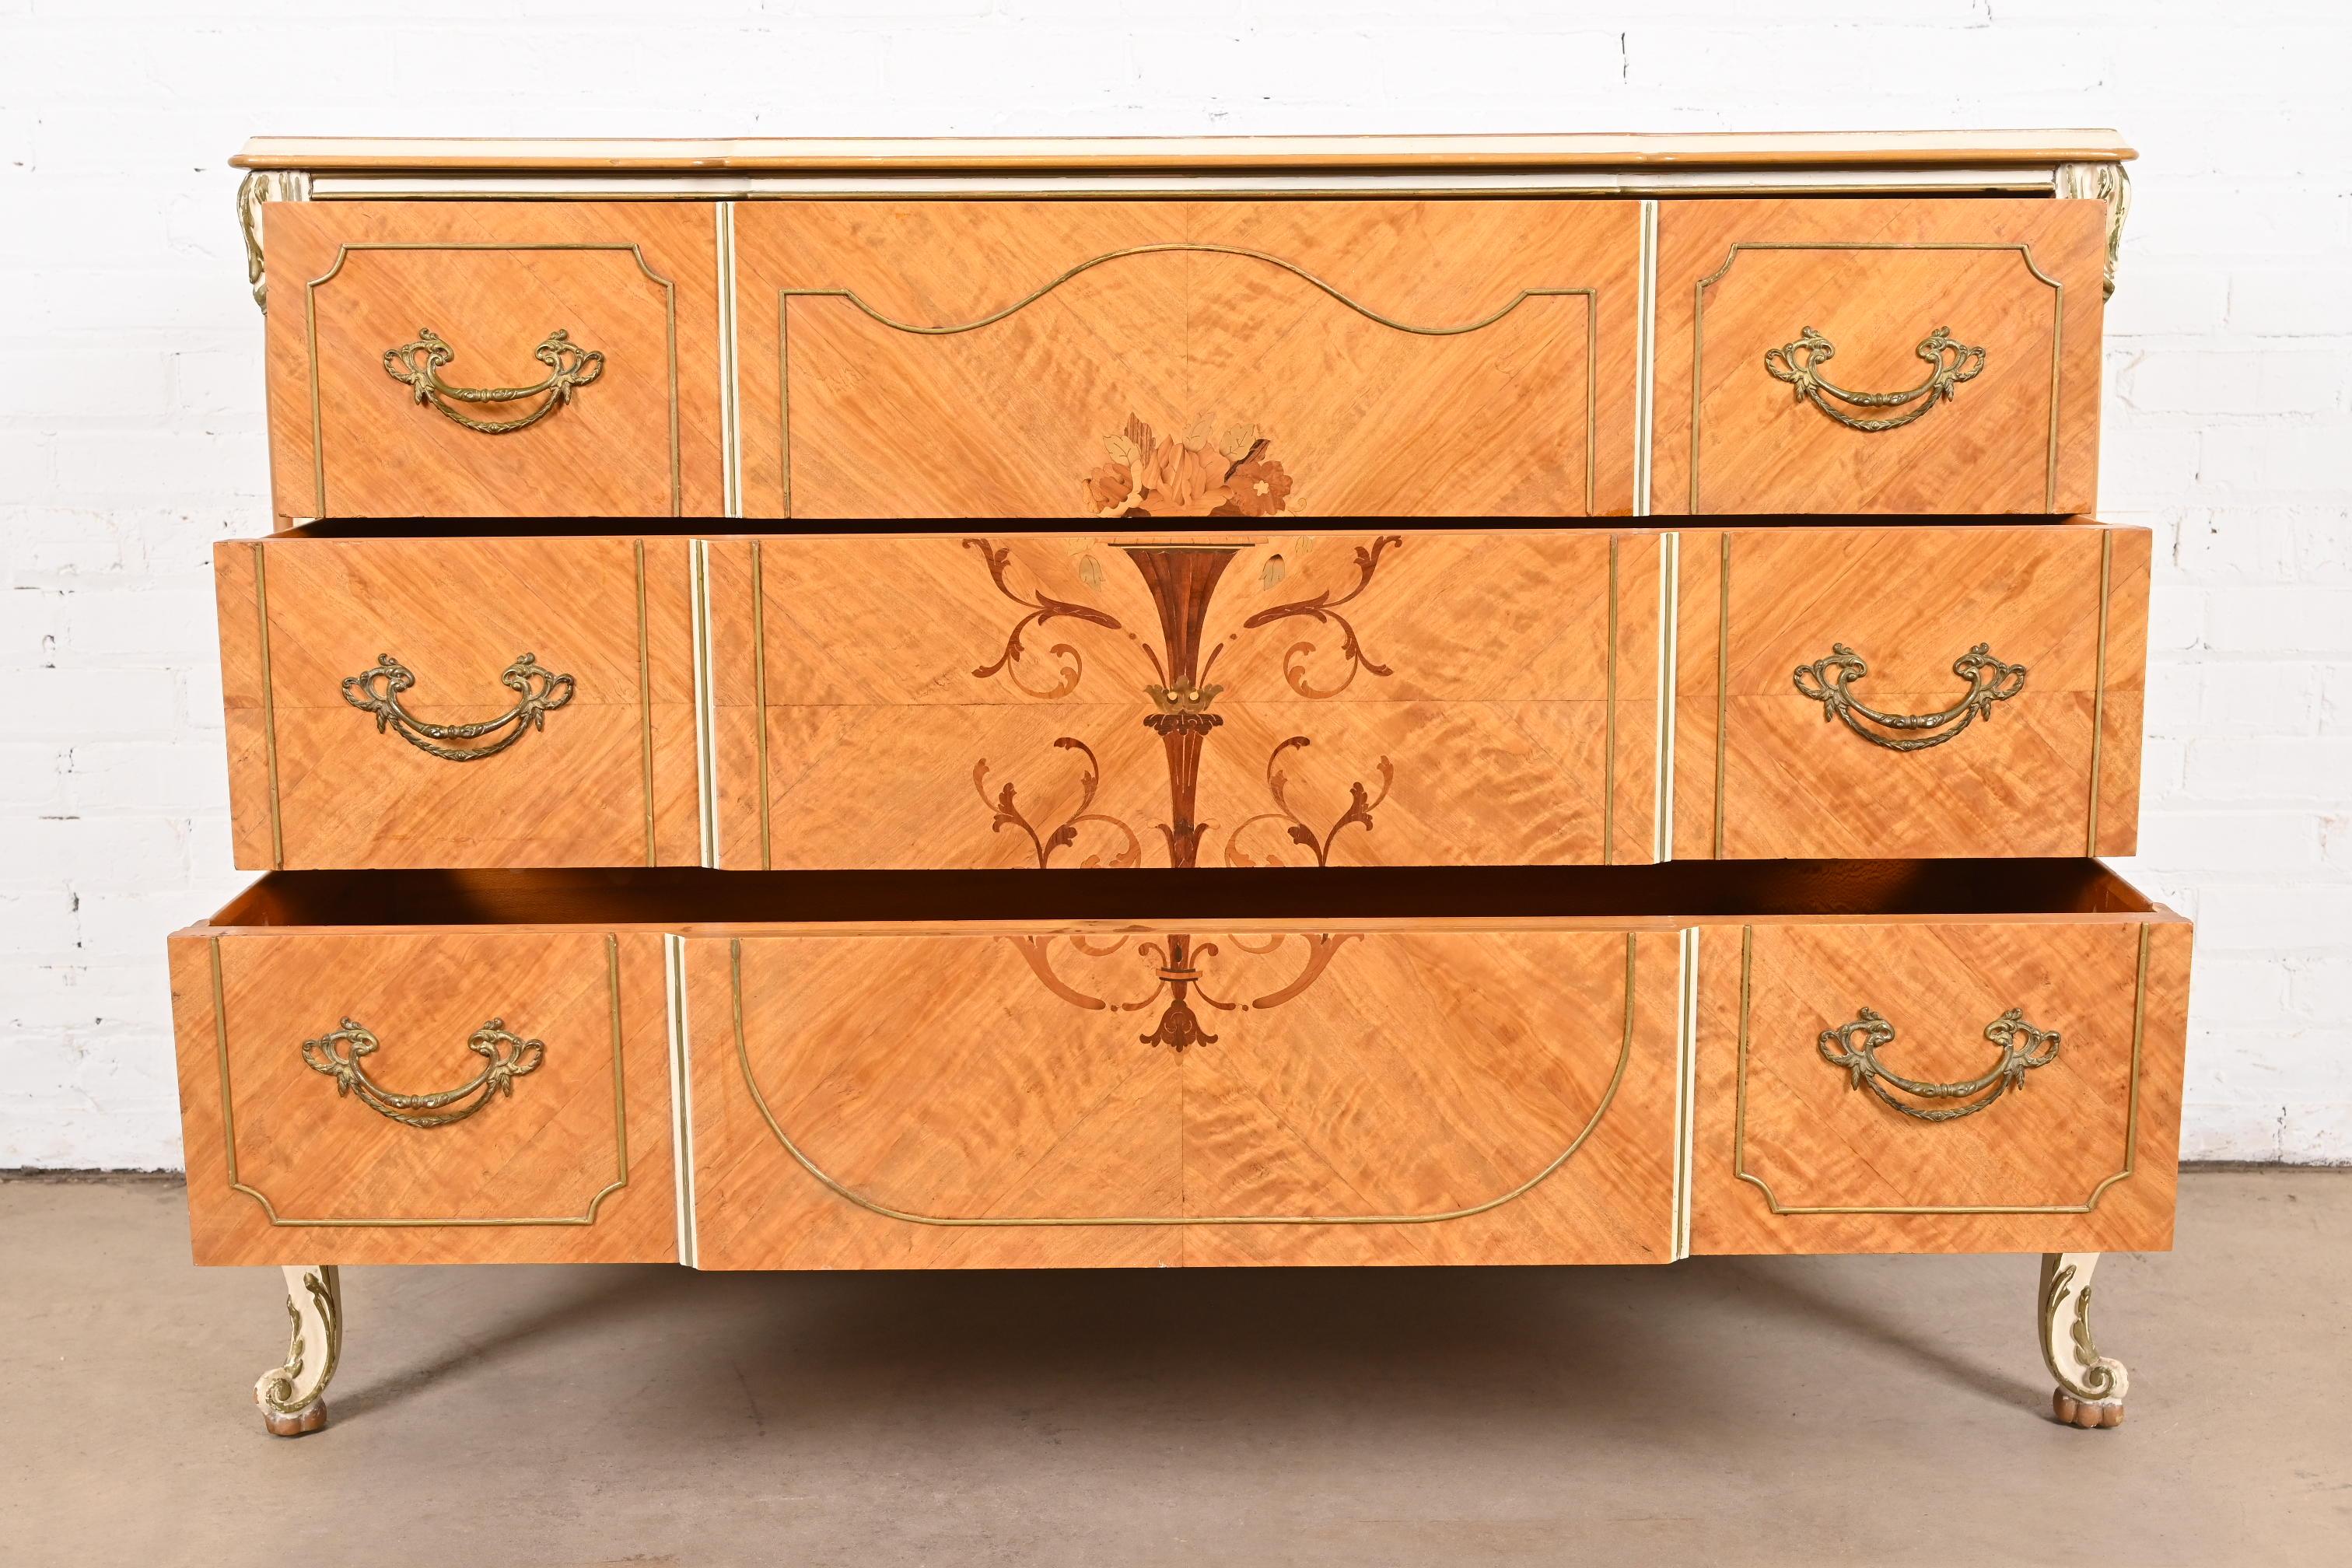 Romweber French Rococo Satinwood Inlaid Marquetry Parcel Painted Dresser, 1930s For Sale 4